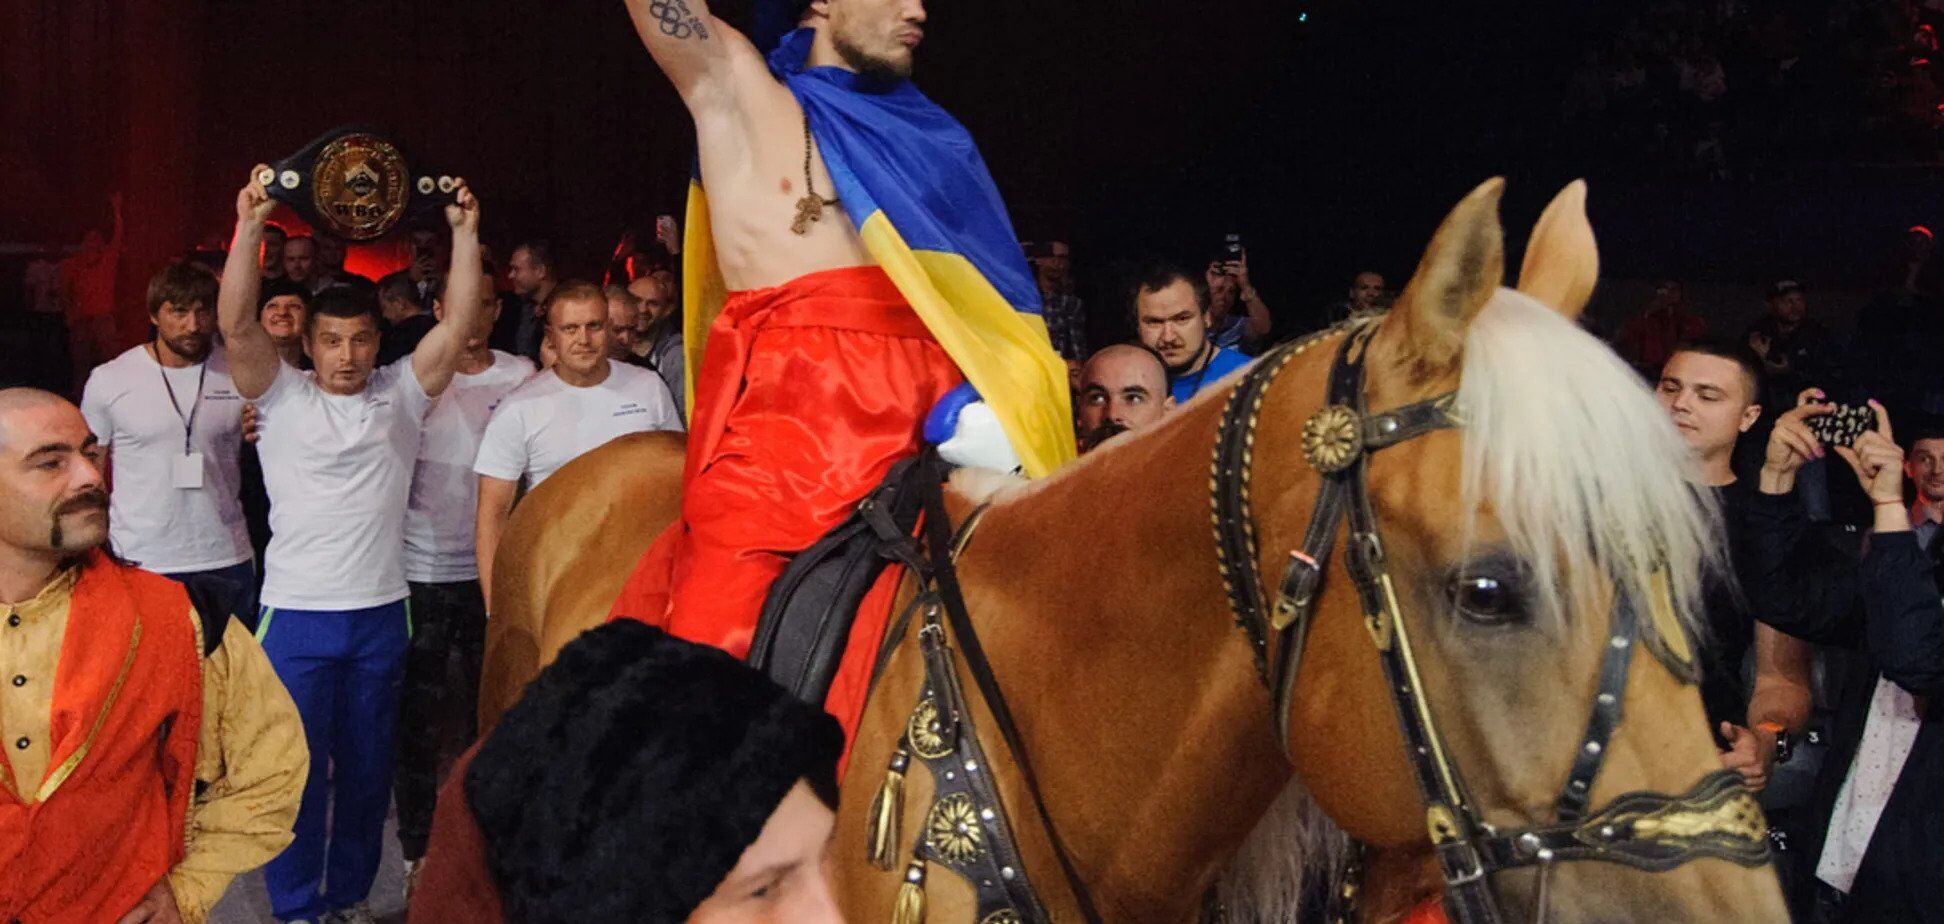 Axe, horns and ''Glory to Ukraine!'' Berinchik amazed with his exit in the ring. Video